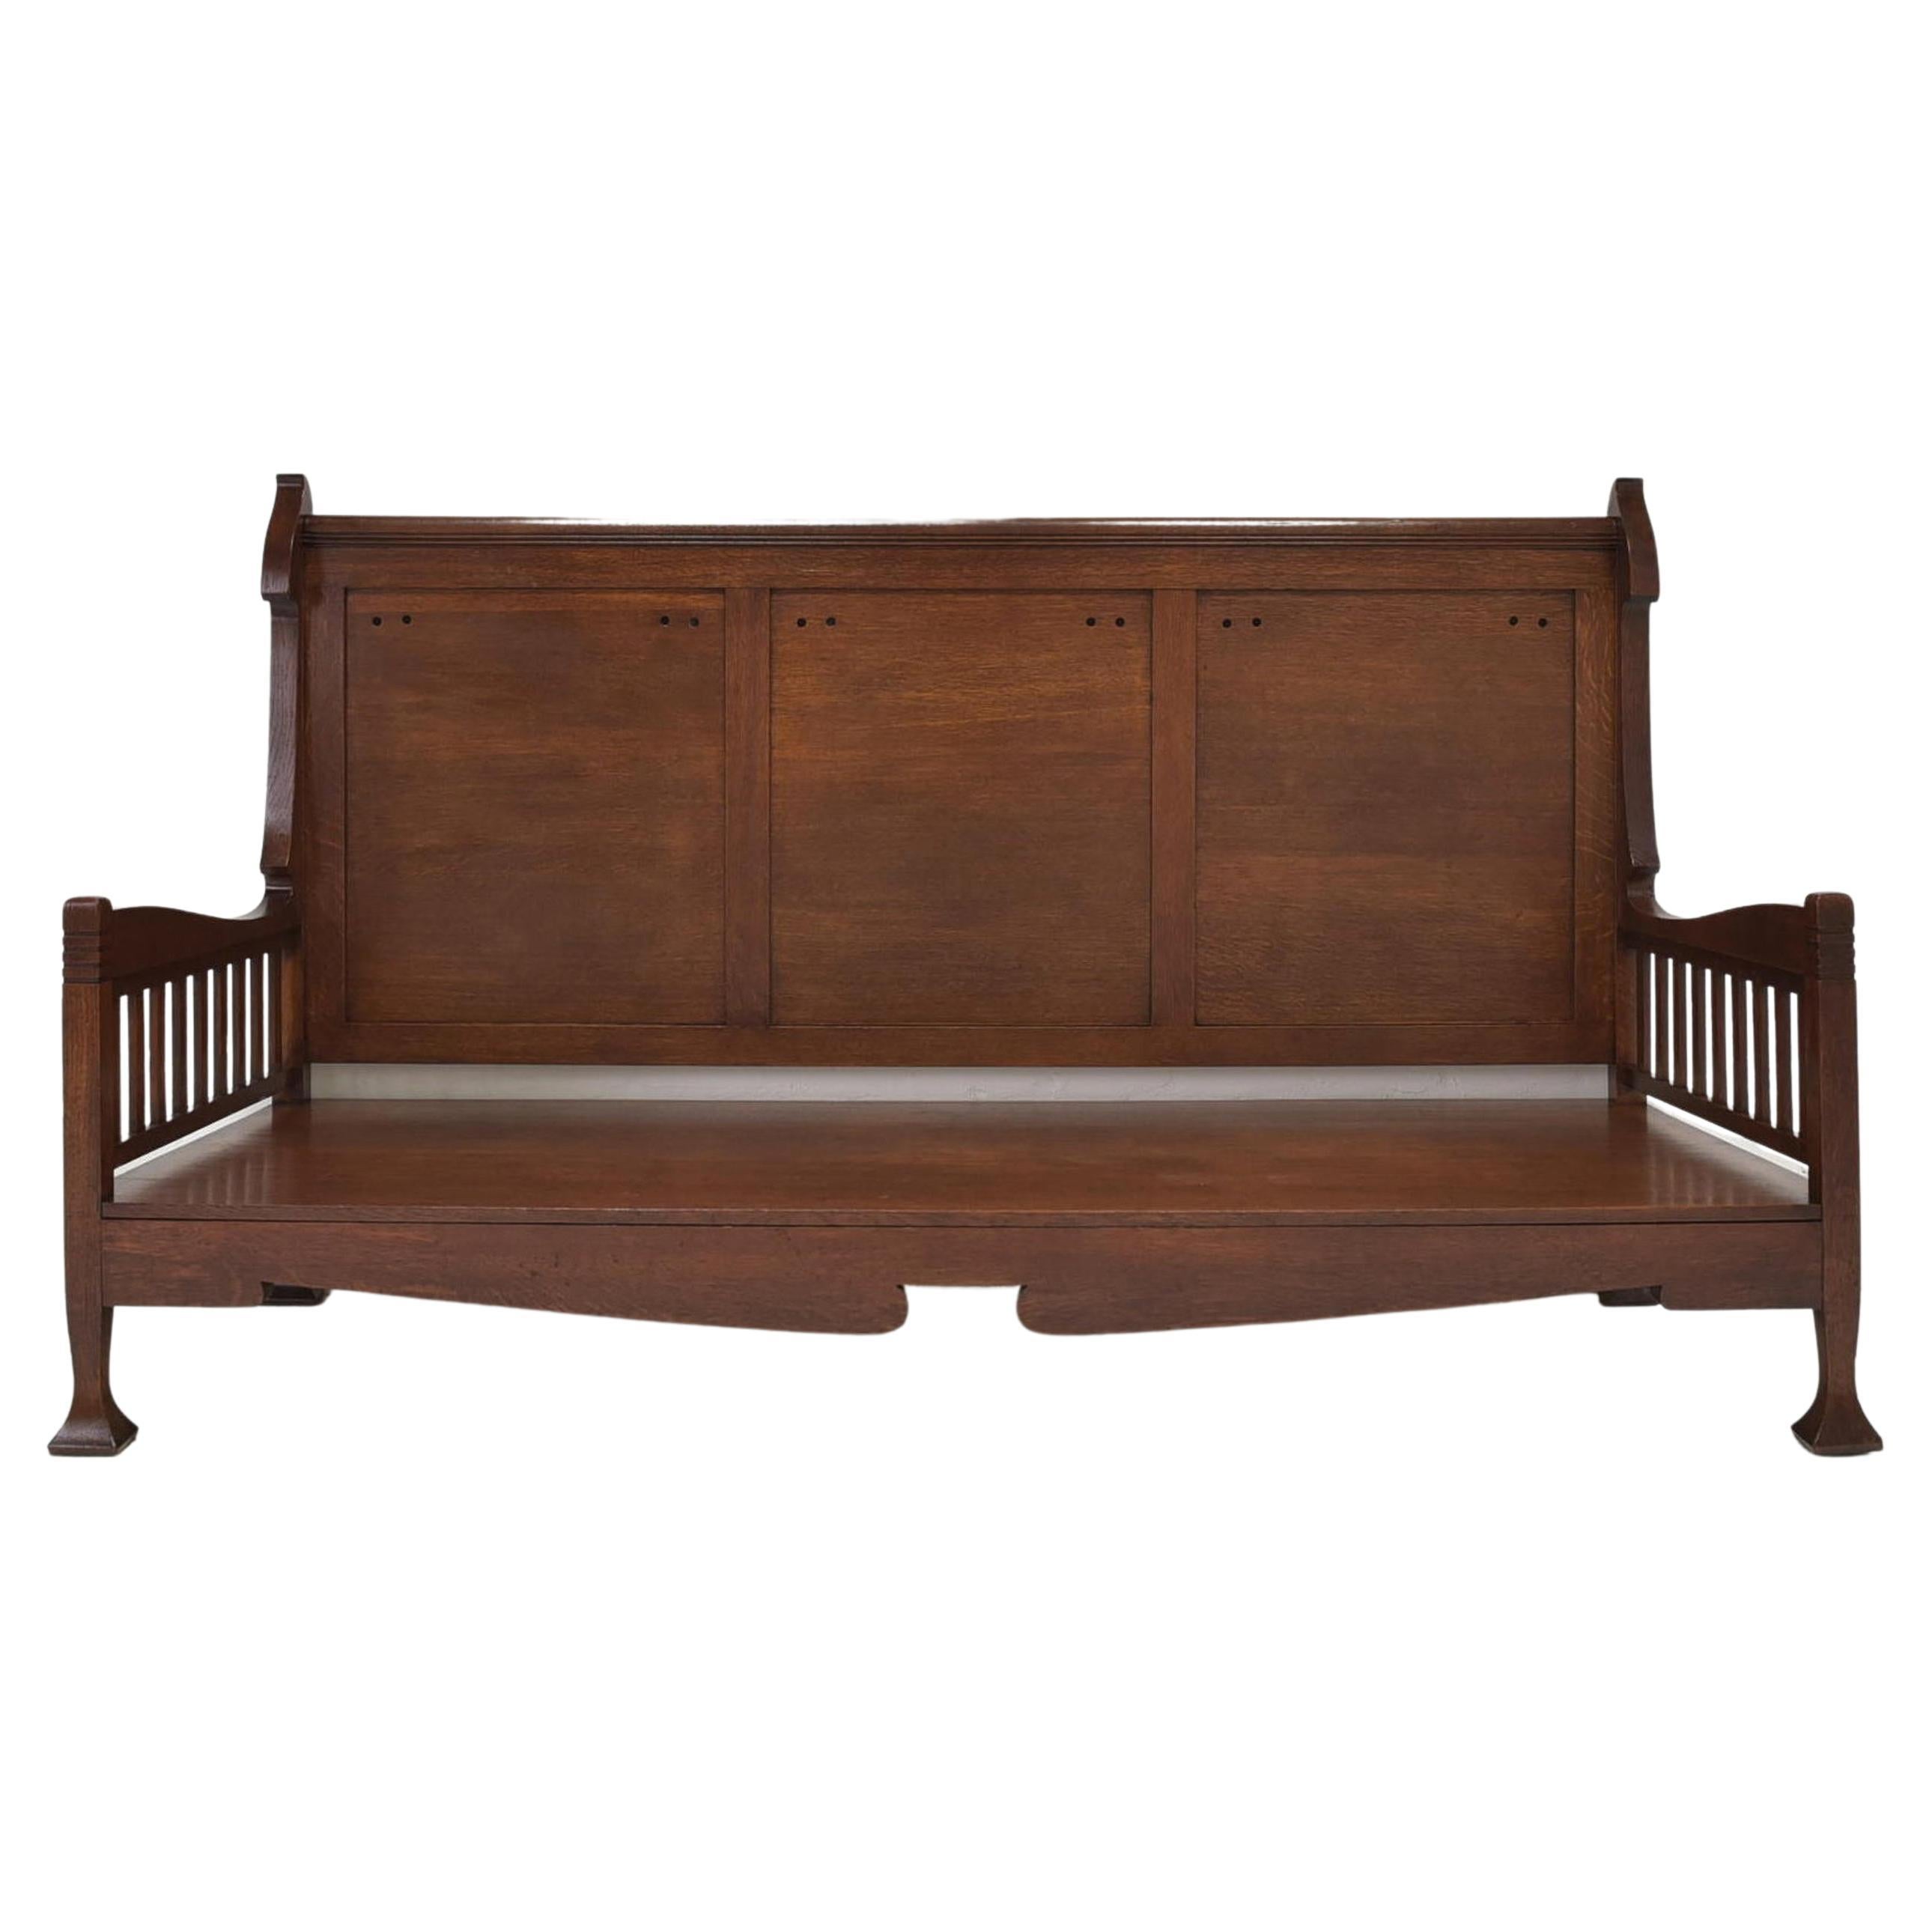 Art Nouveau Daybed in Solid Oak / Lounger Sofa, 1905 For Sale